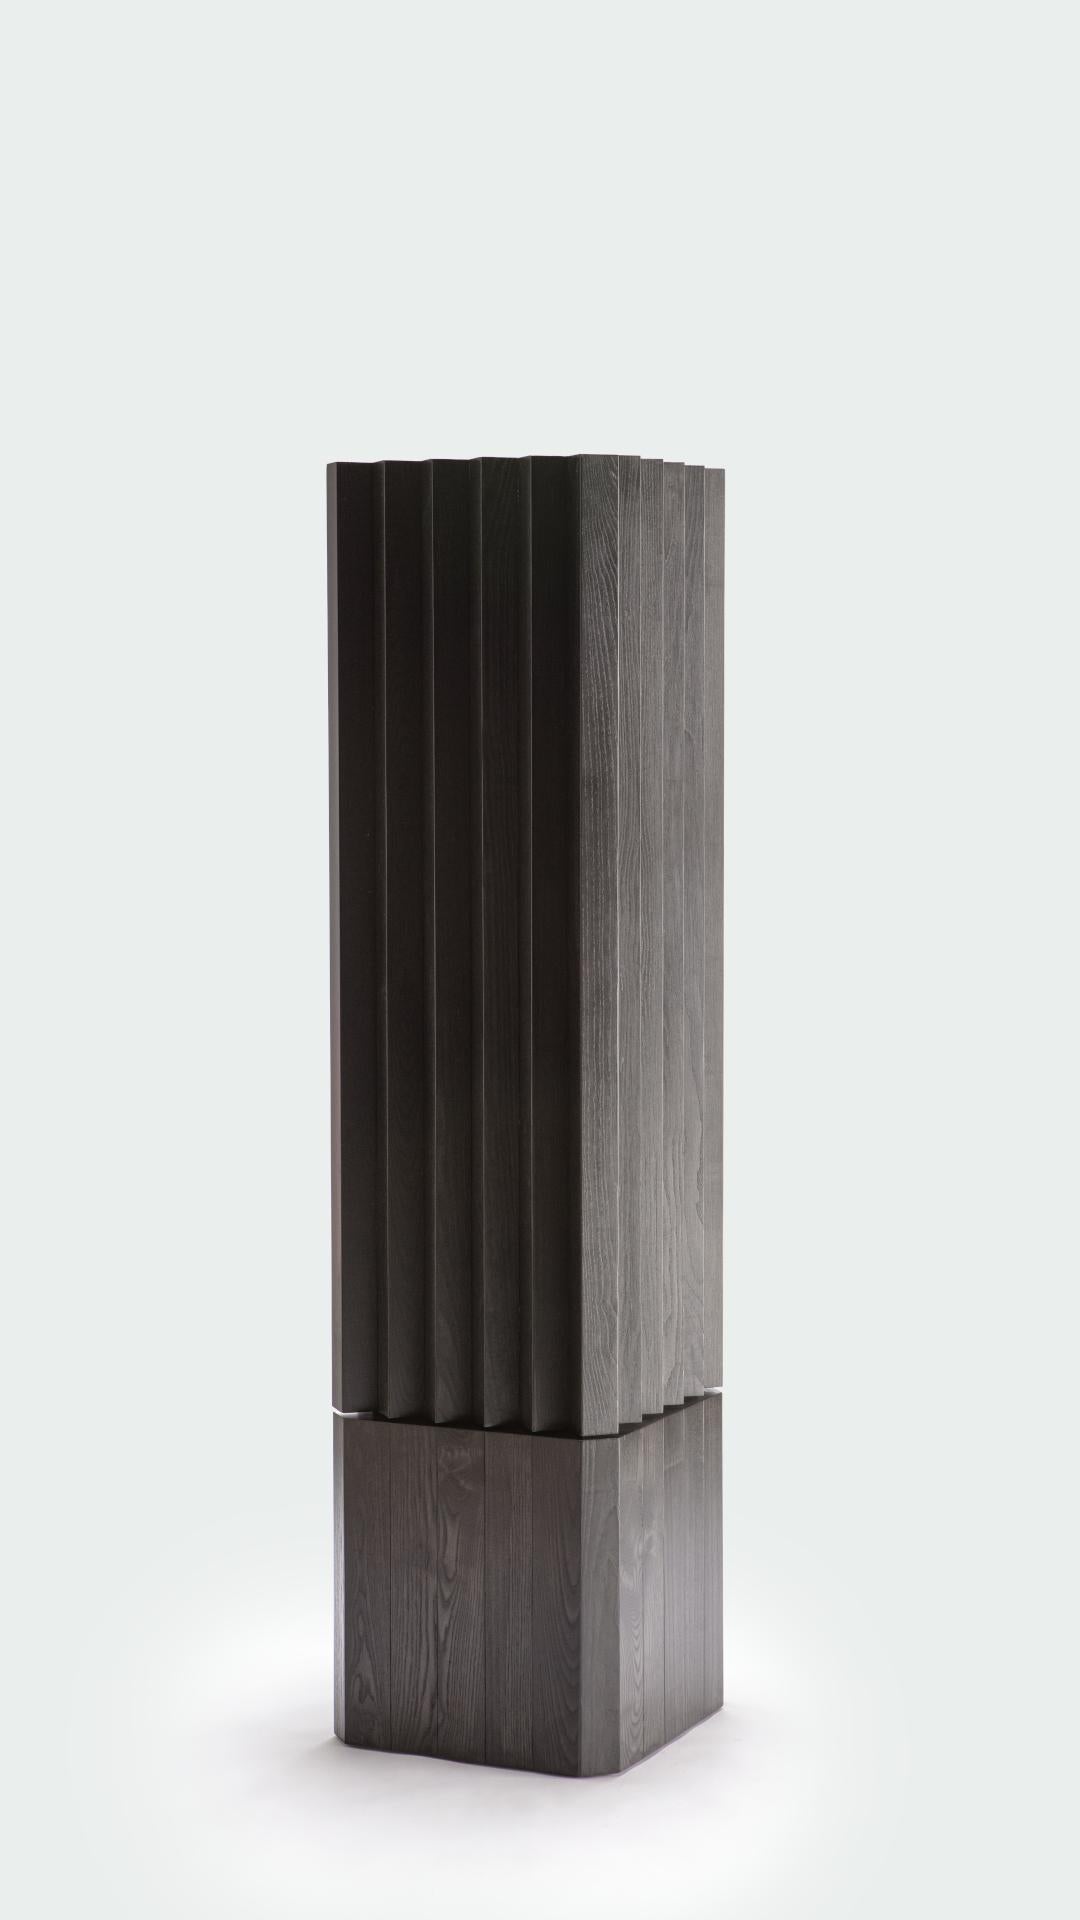 210 Wood Column with Lacquered Interiors by Cara Davide
Dimensions: D 51 x W 51 x H 210 cm 
Materials: Solid wood on multilayer structure, 10mm extra-clear tempered glass shelves, with lacquered interiors.
Colors: Ash with aniline finish,